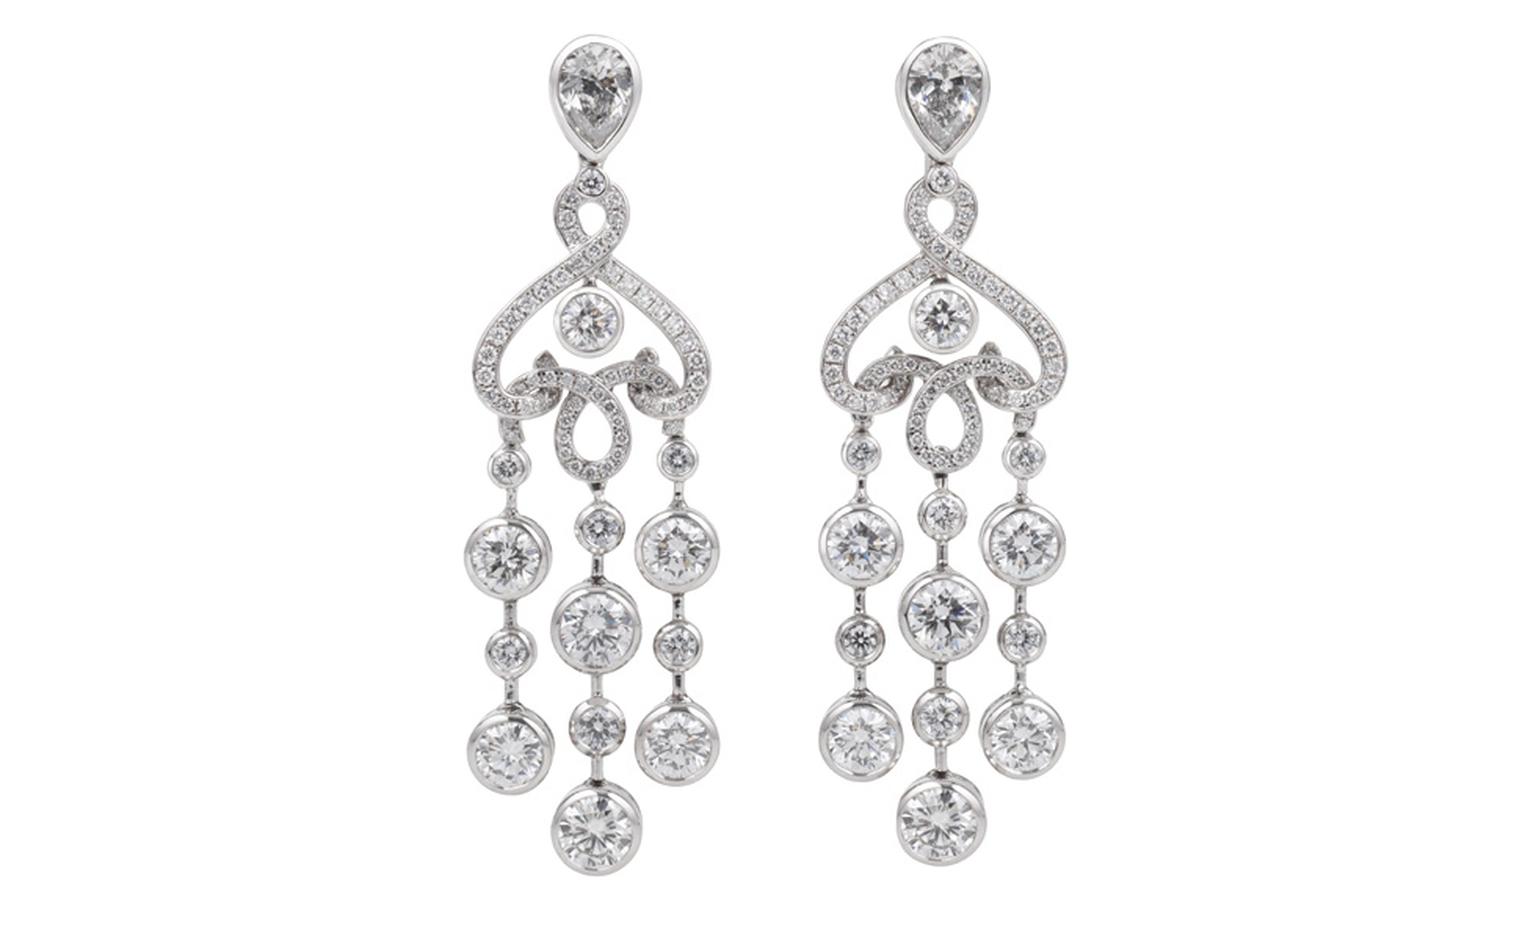 Fabergé Carnet de Bal White Damask earrings inspired by the damask table cloths used to drape banquet tables in Russia in the early 20th century. POA